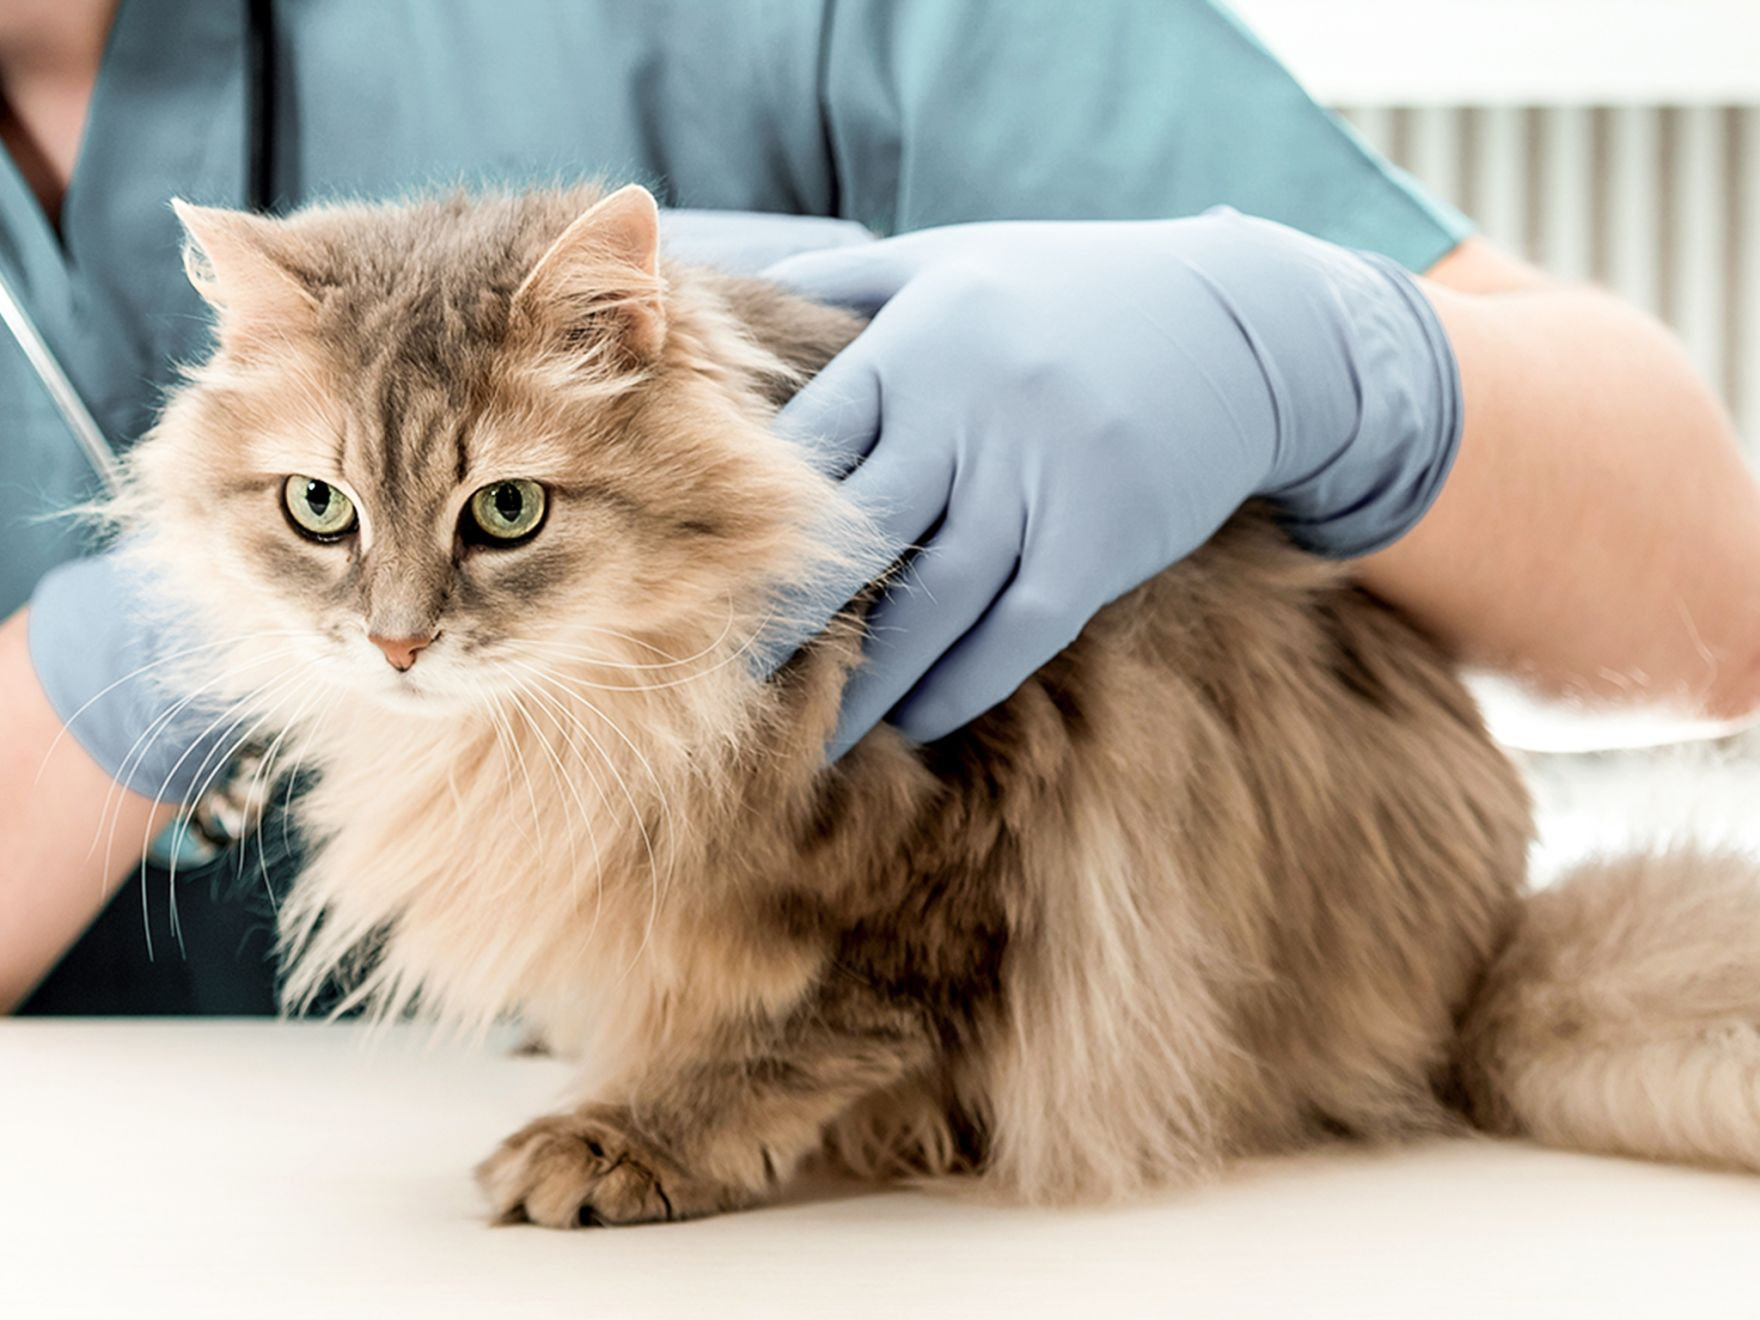 Cat being assessed by a vet